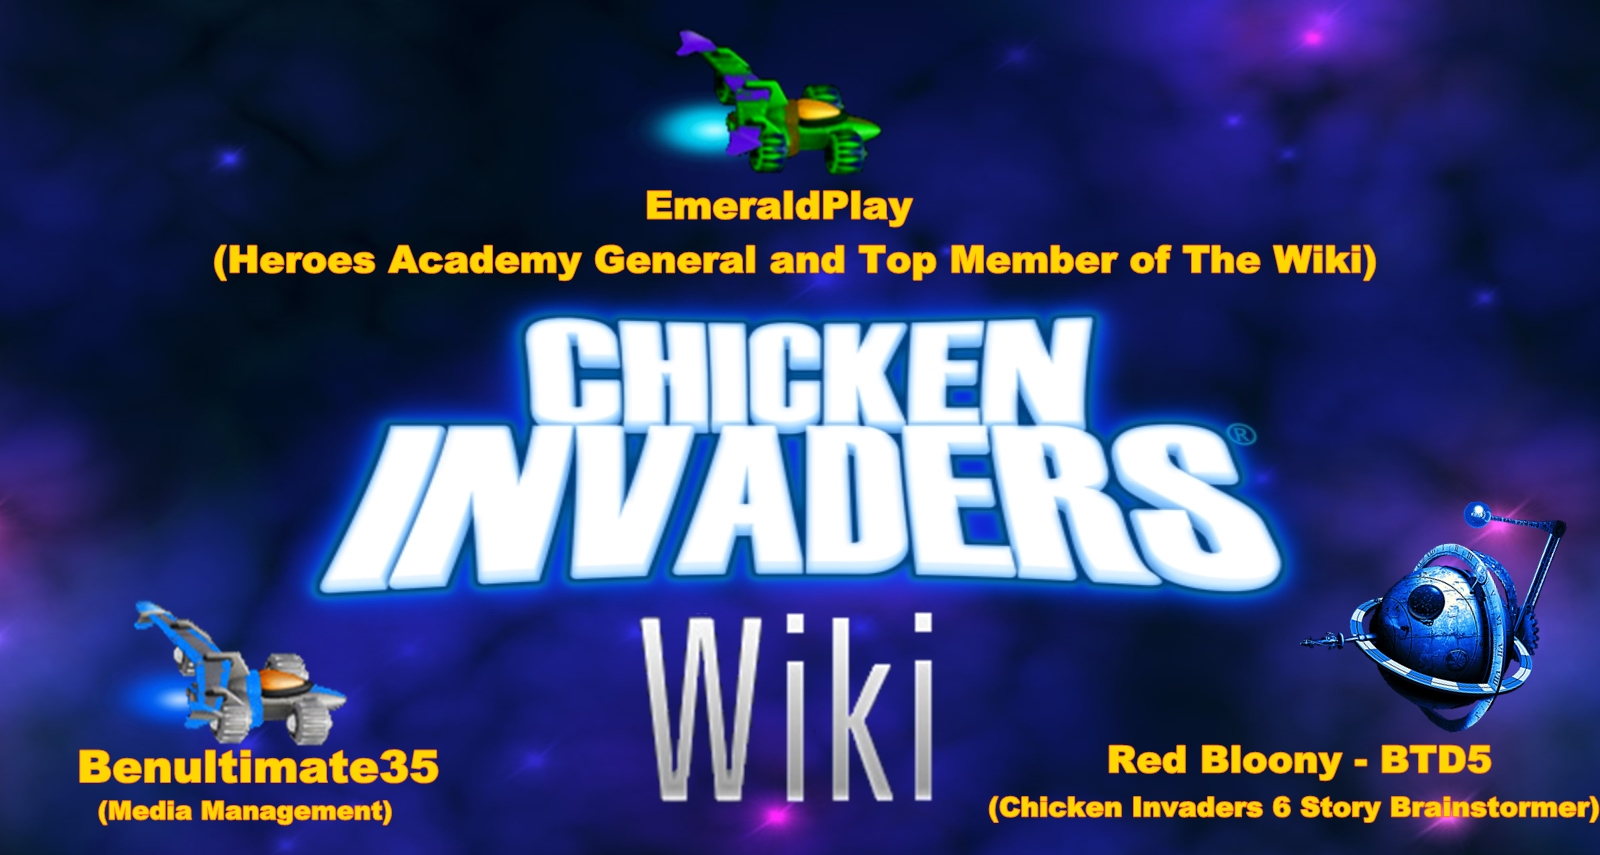 chicken invaders ultimate omelette wiki